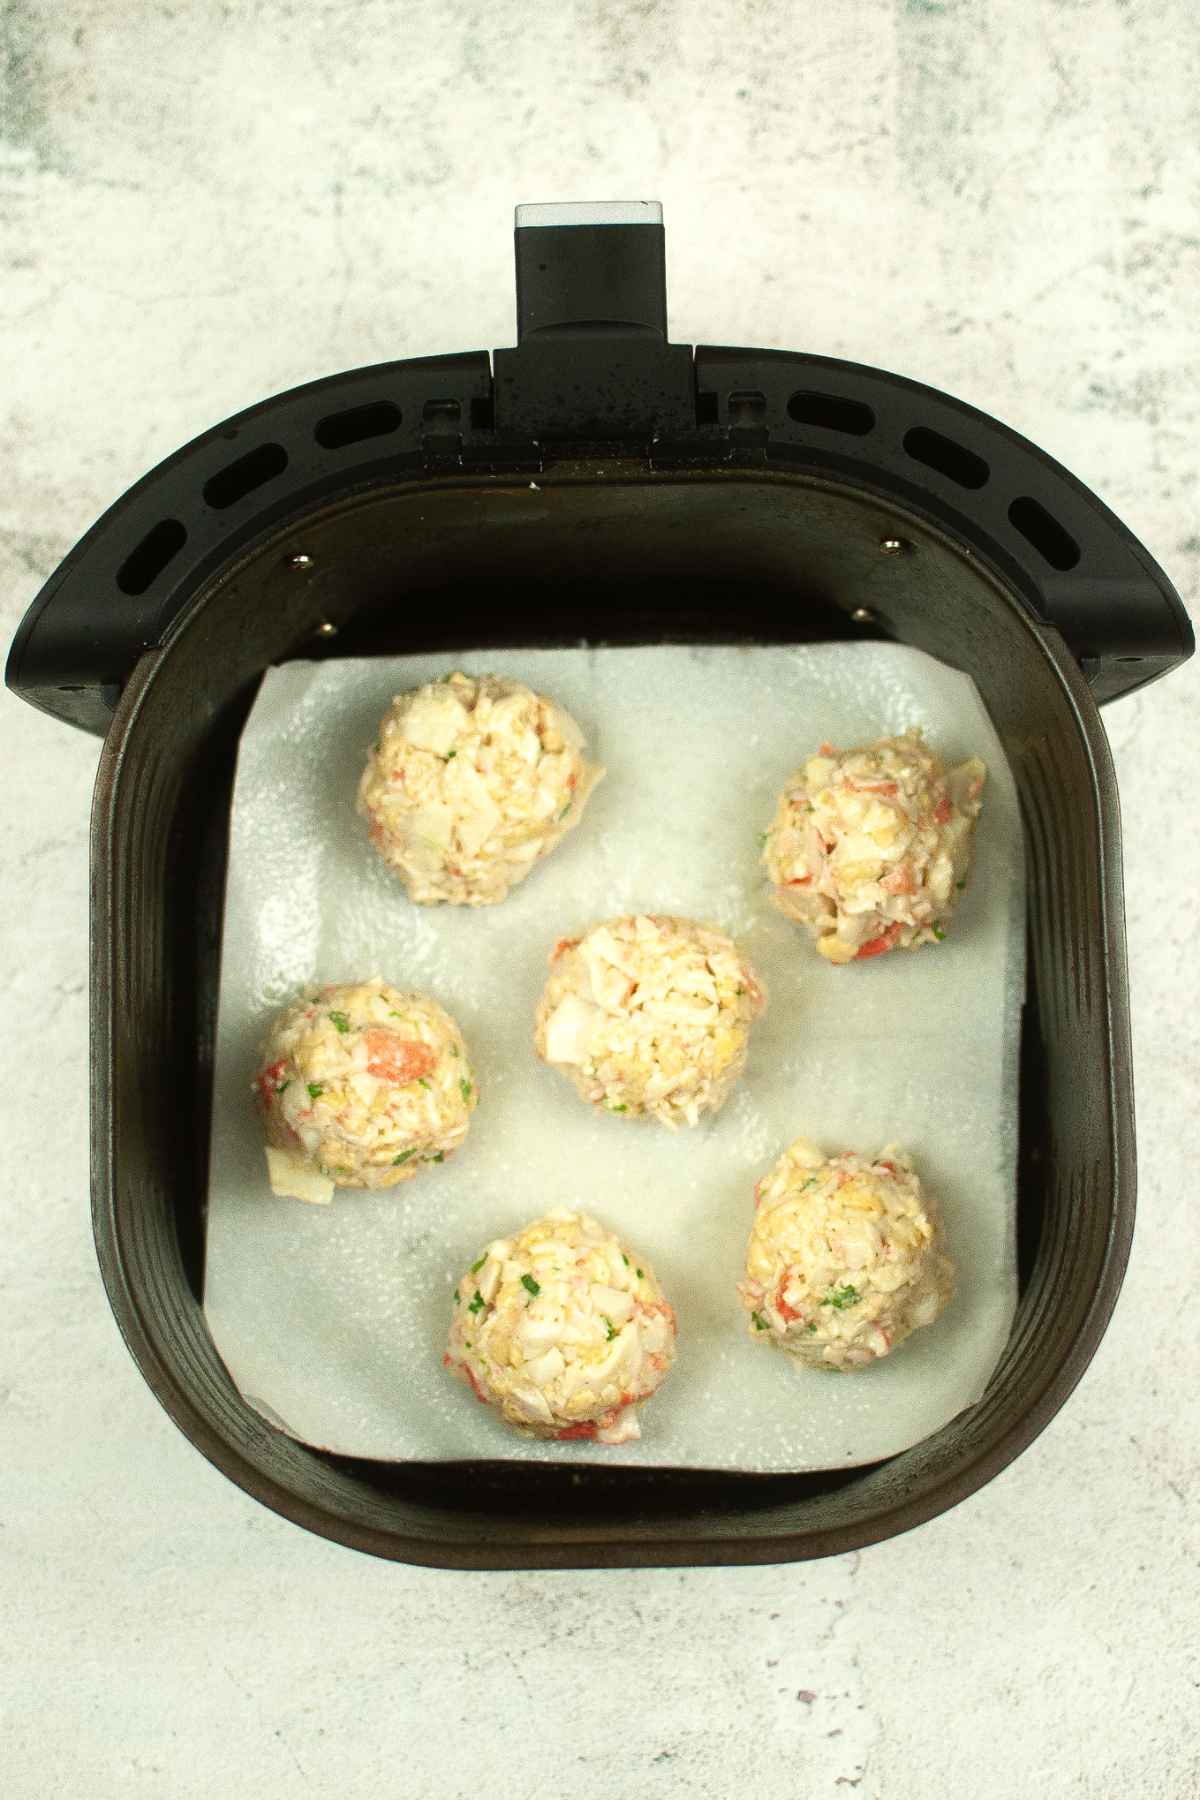 Uncooked crab cakes in air fryer basket lined with parchment paper.